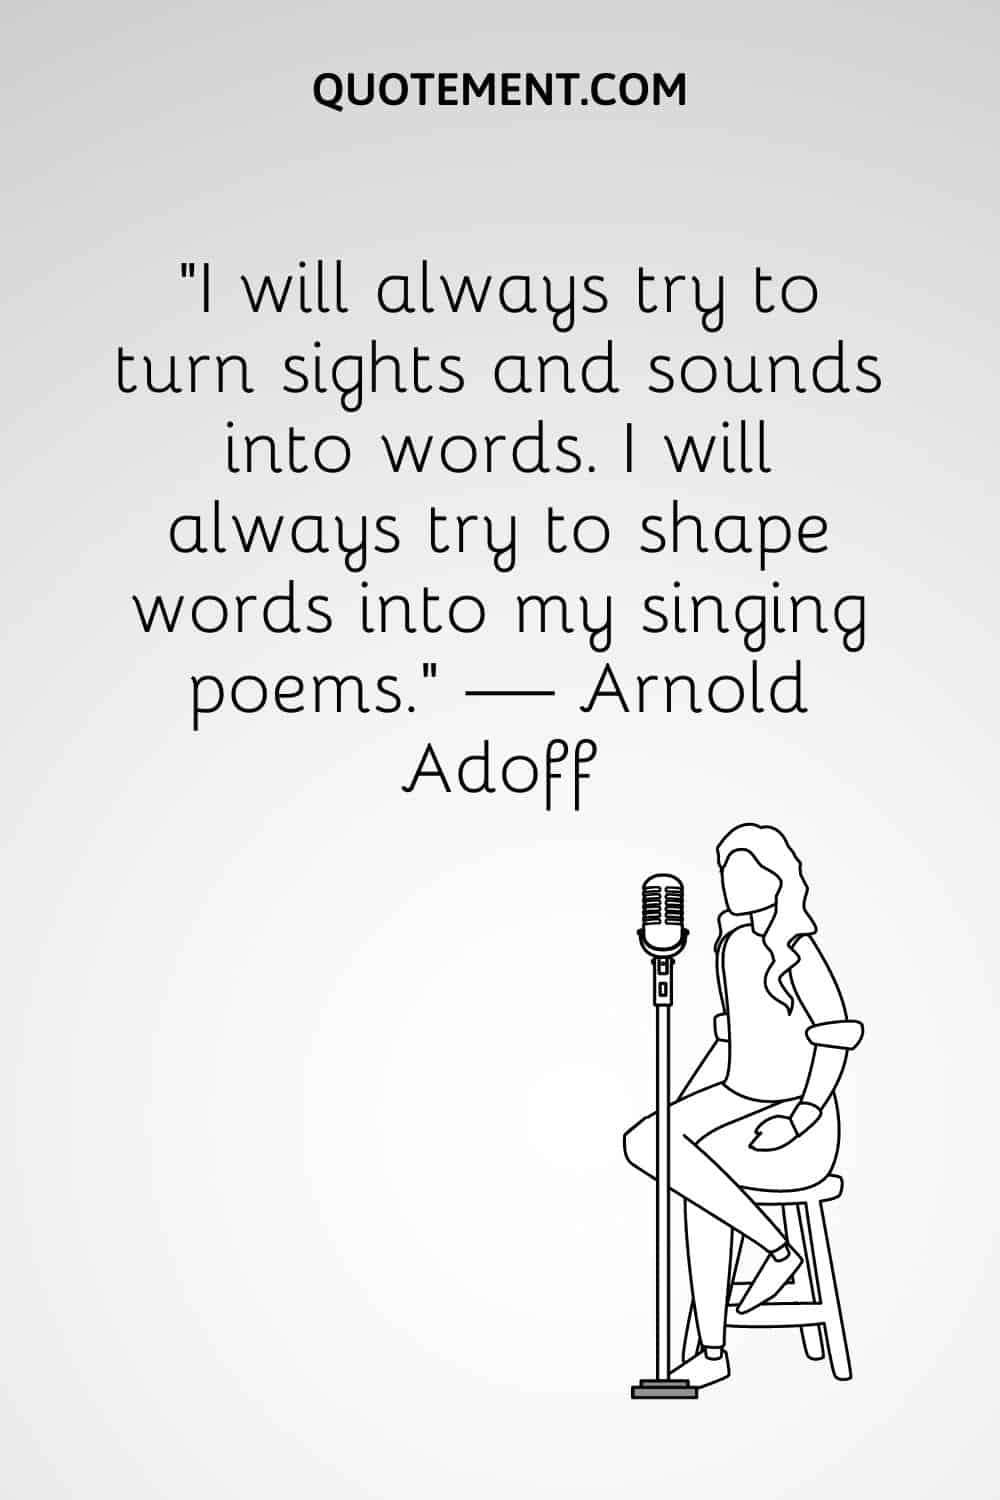 “I will always try to turn sights and sounds into words. I will always try to shape words into my singing poems.” — Arnold Adoff